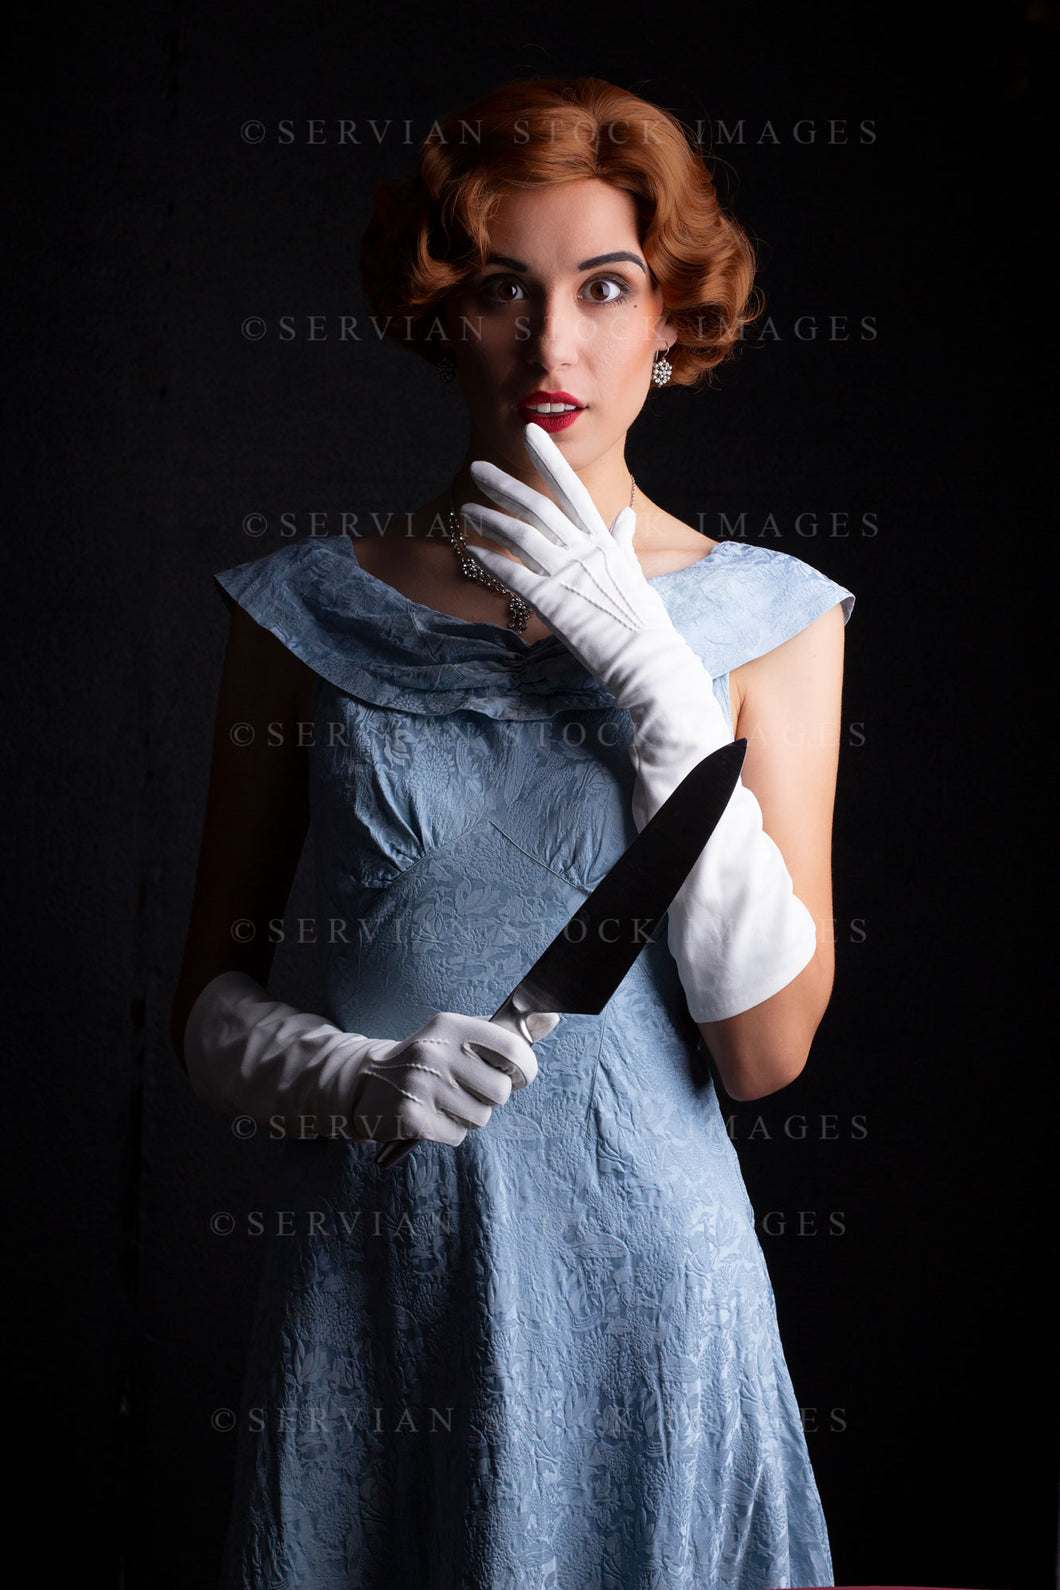 1930s woman wearing a blue vintage dress, long white gloves, and a diamante necklace. She's holding a large kitchen knife against a black backdrop.(Sarah 0259)